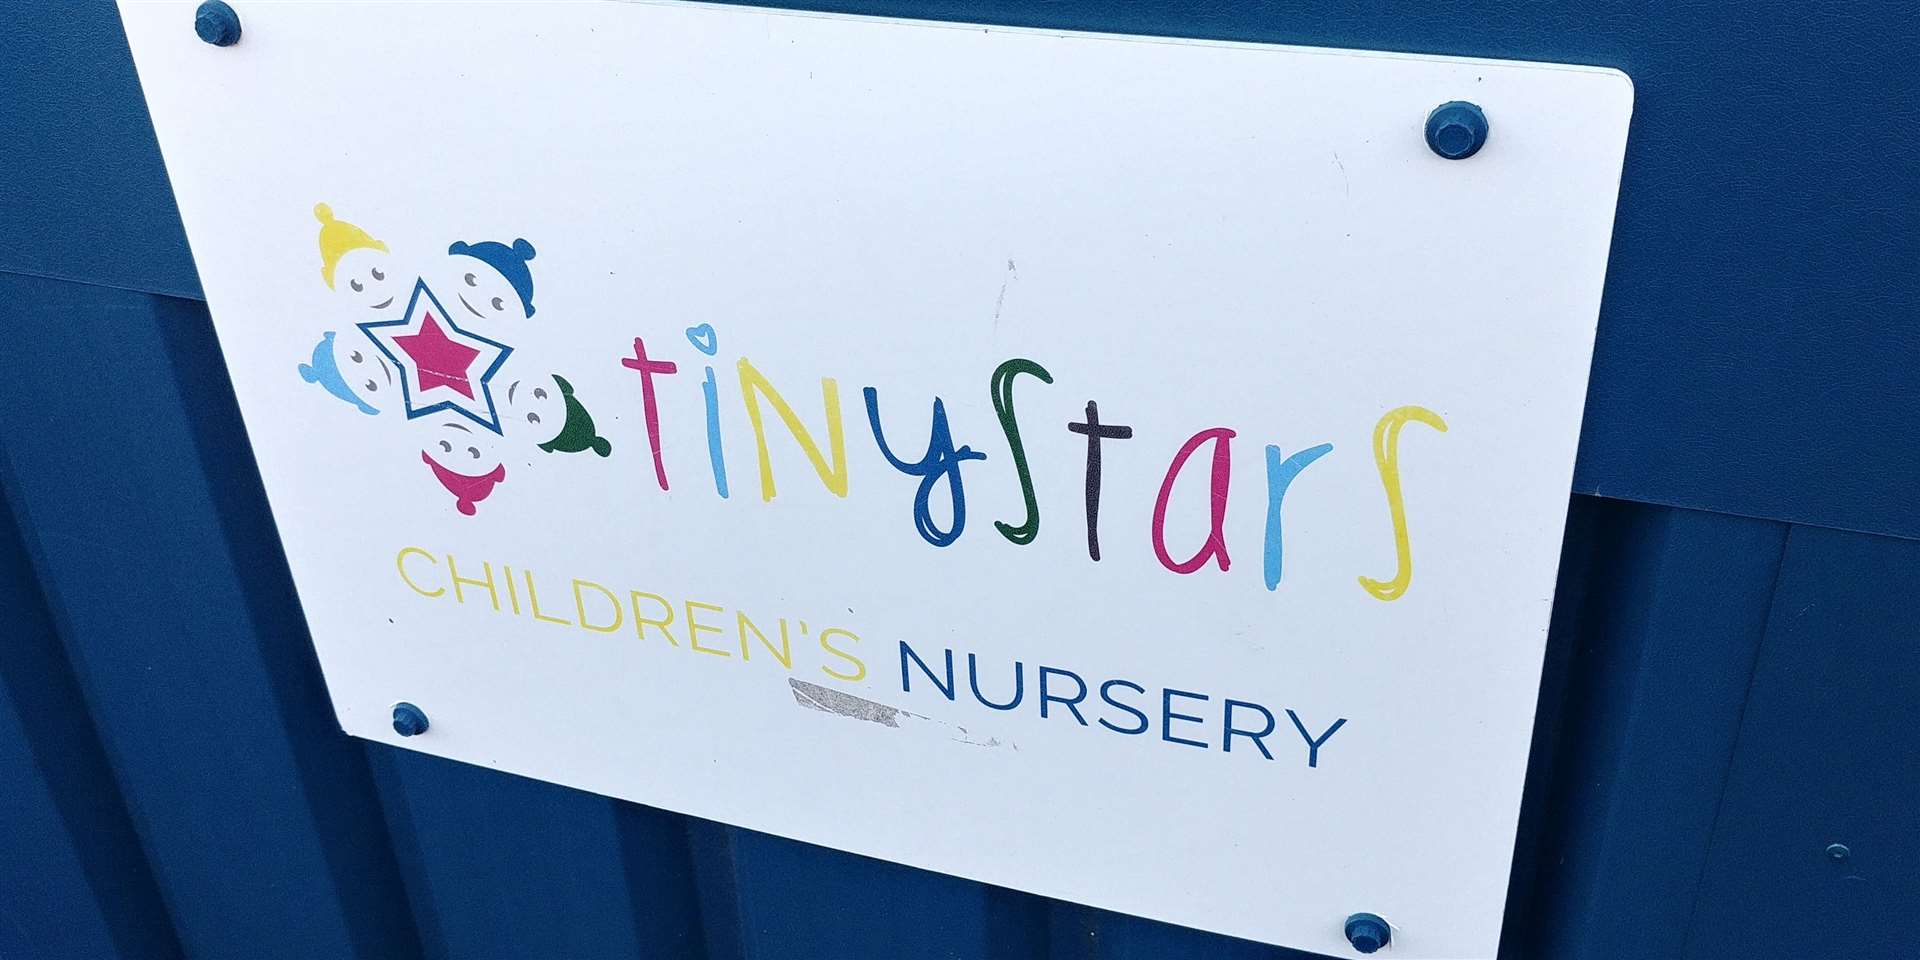 Tiny Stars nursery in Simmonds Road in Canterbury